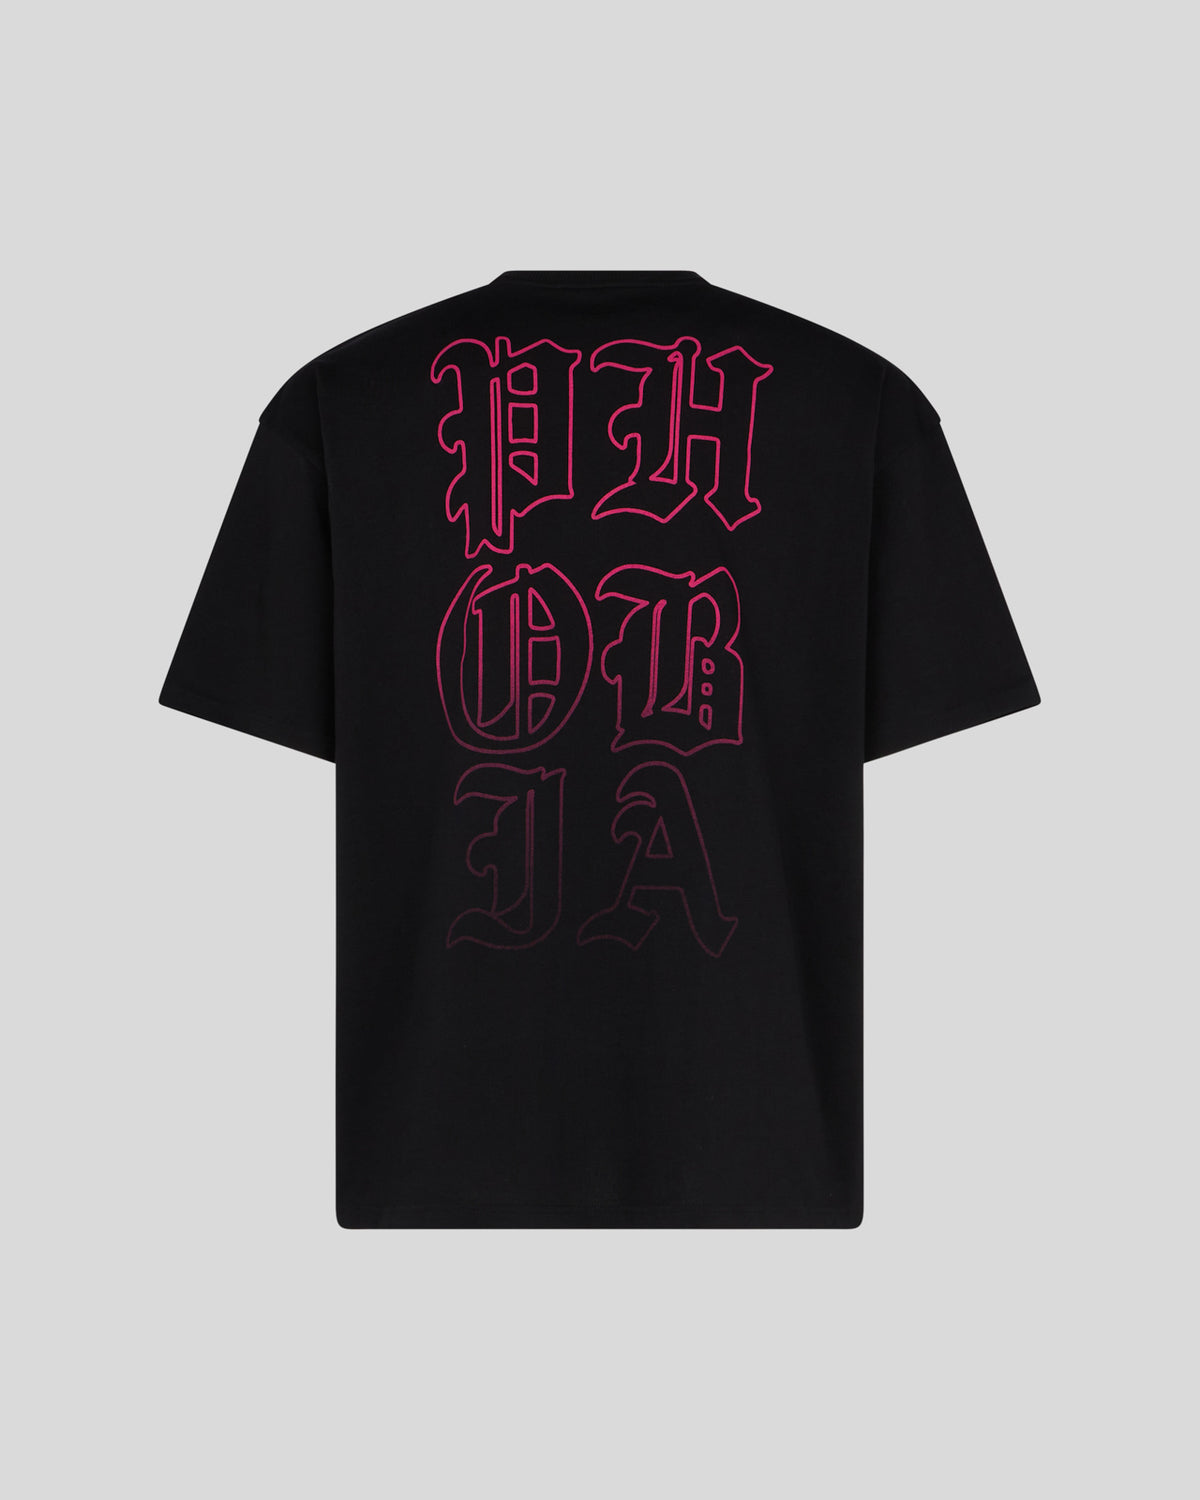 PHOBIA BLACK T-SHIRT WITH PINK MOUTH PRINT